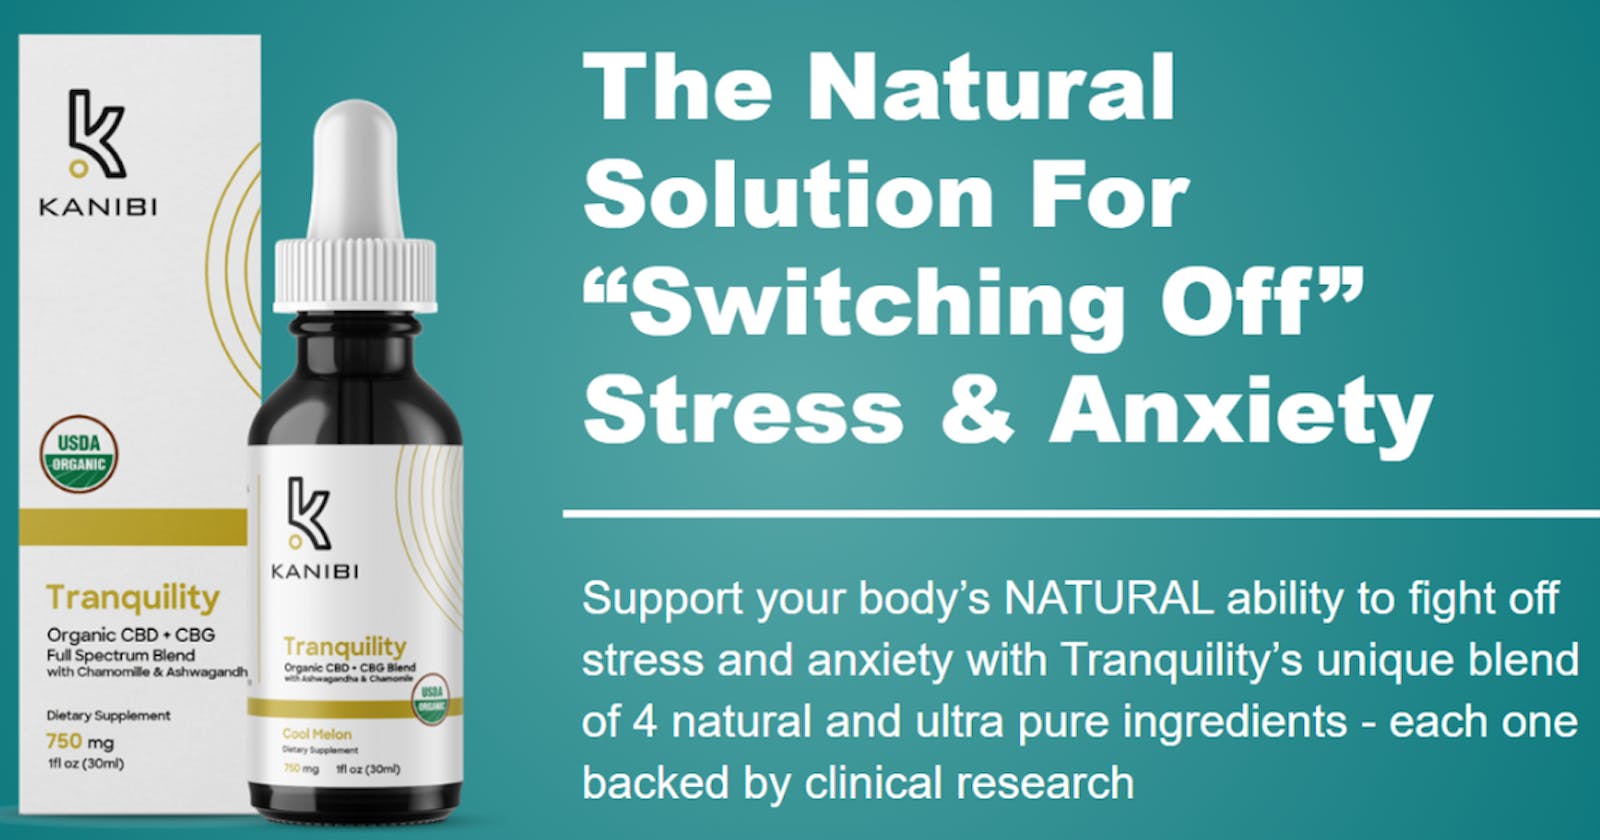 Step-by-Step Guide: Determining the Right Dosage of Kanibi Tranquility CBD!